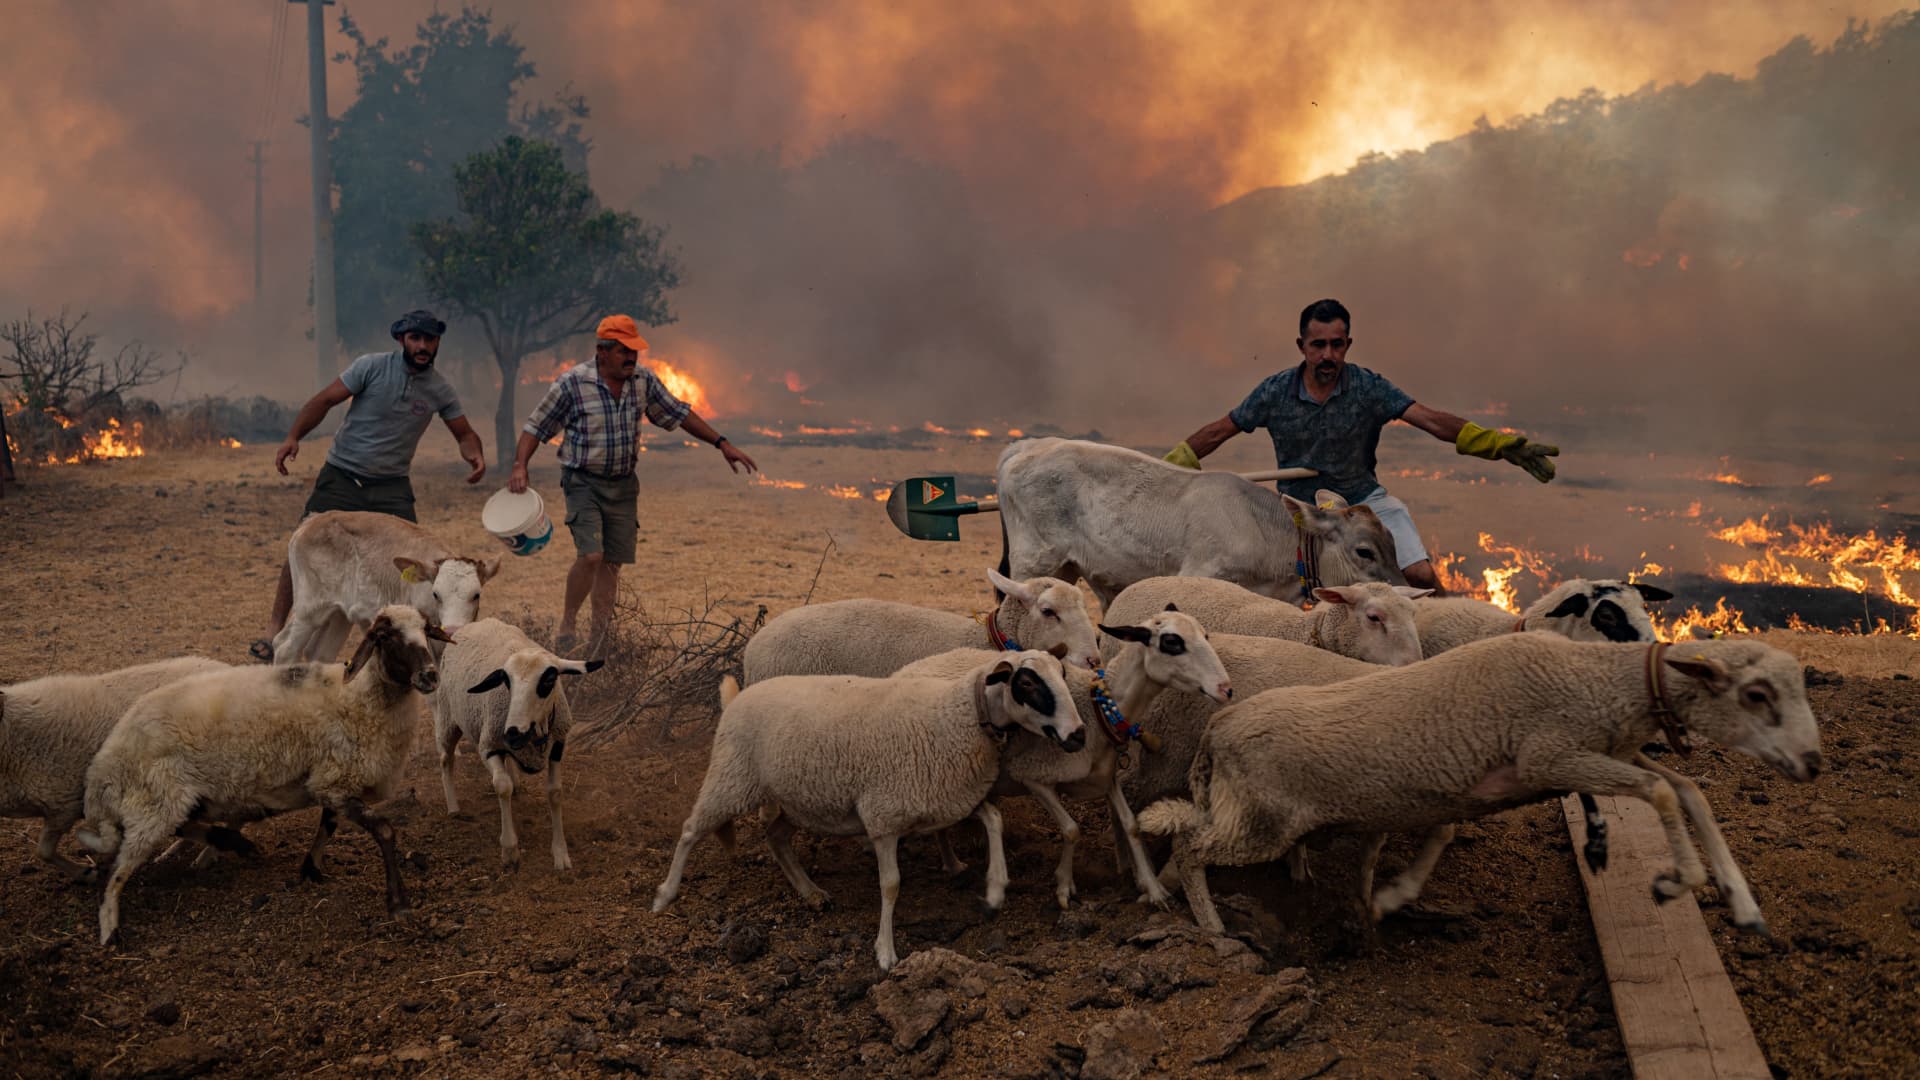 Men gather sheeps to take them away from an advancing fire on August 2, 2021 in Mugla, Marmaris district, as the European Union sent help to Turkey and volunteers joined firefighters in battling a week of violent blazes that have killed eight people.